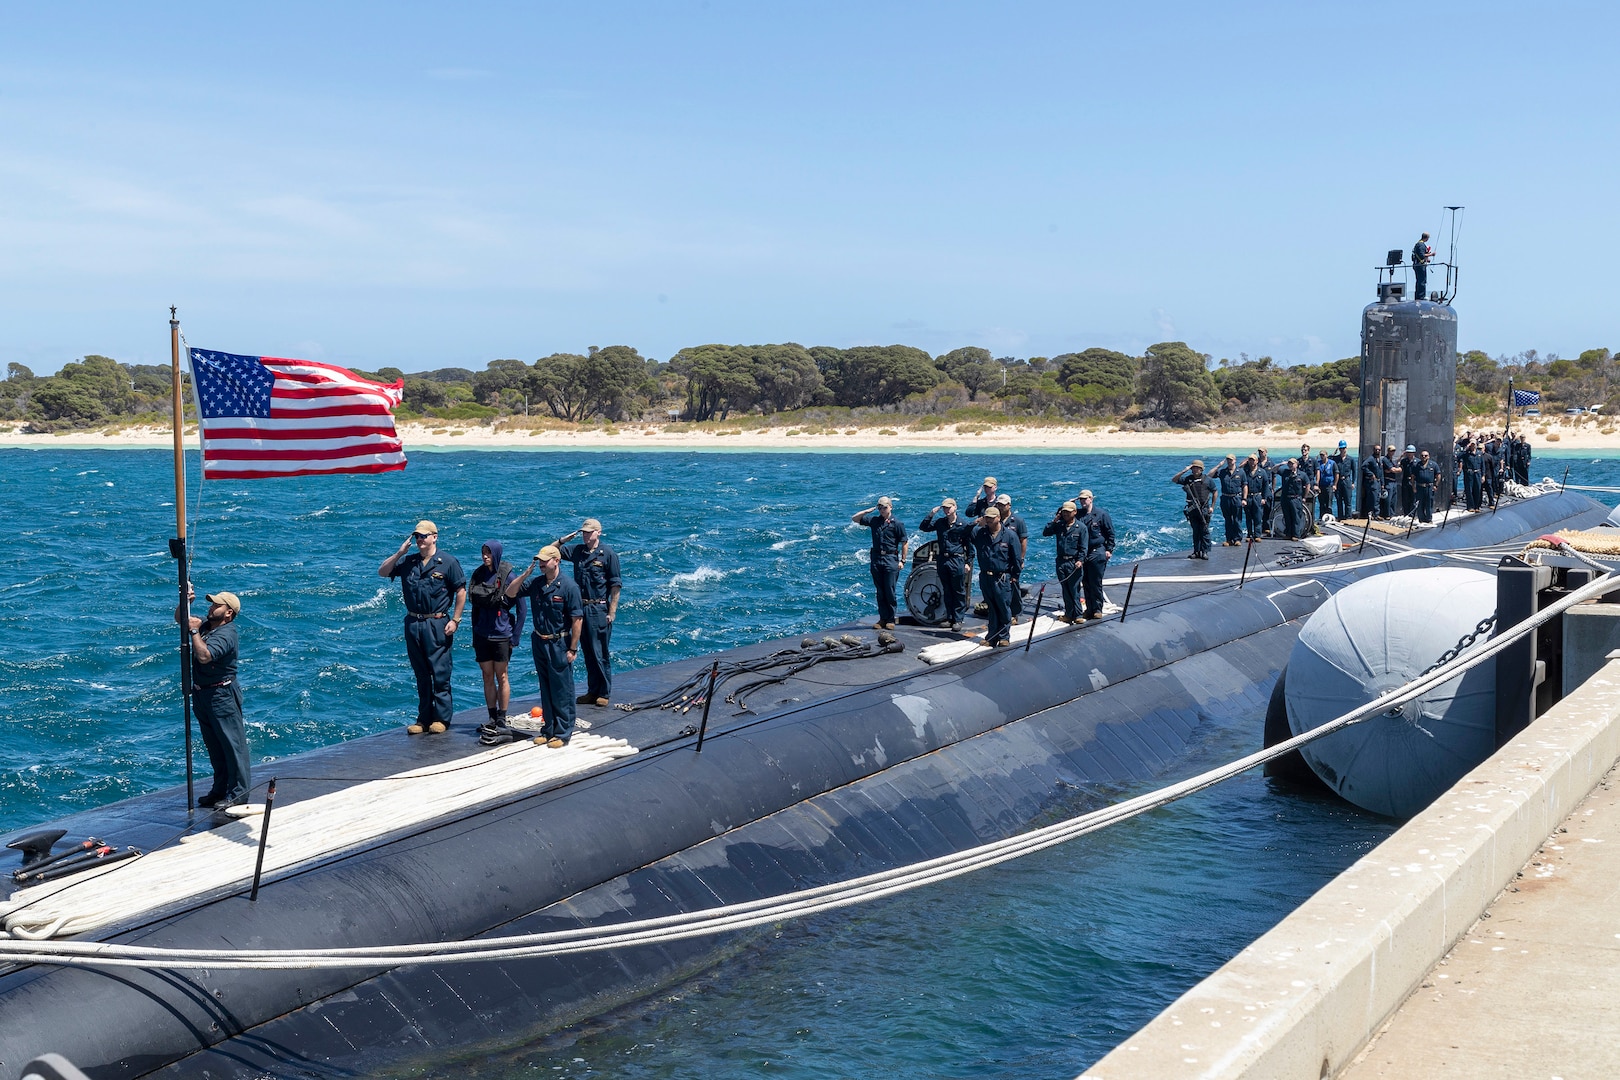 DOD Official Says Sub Agreement Will Help Guarantee Free, Open Indo-Pacific